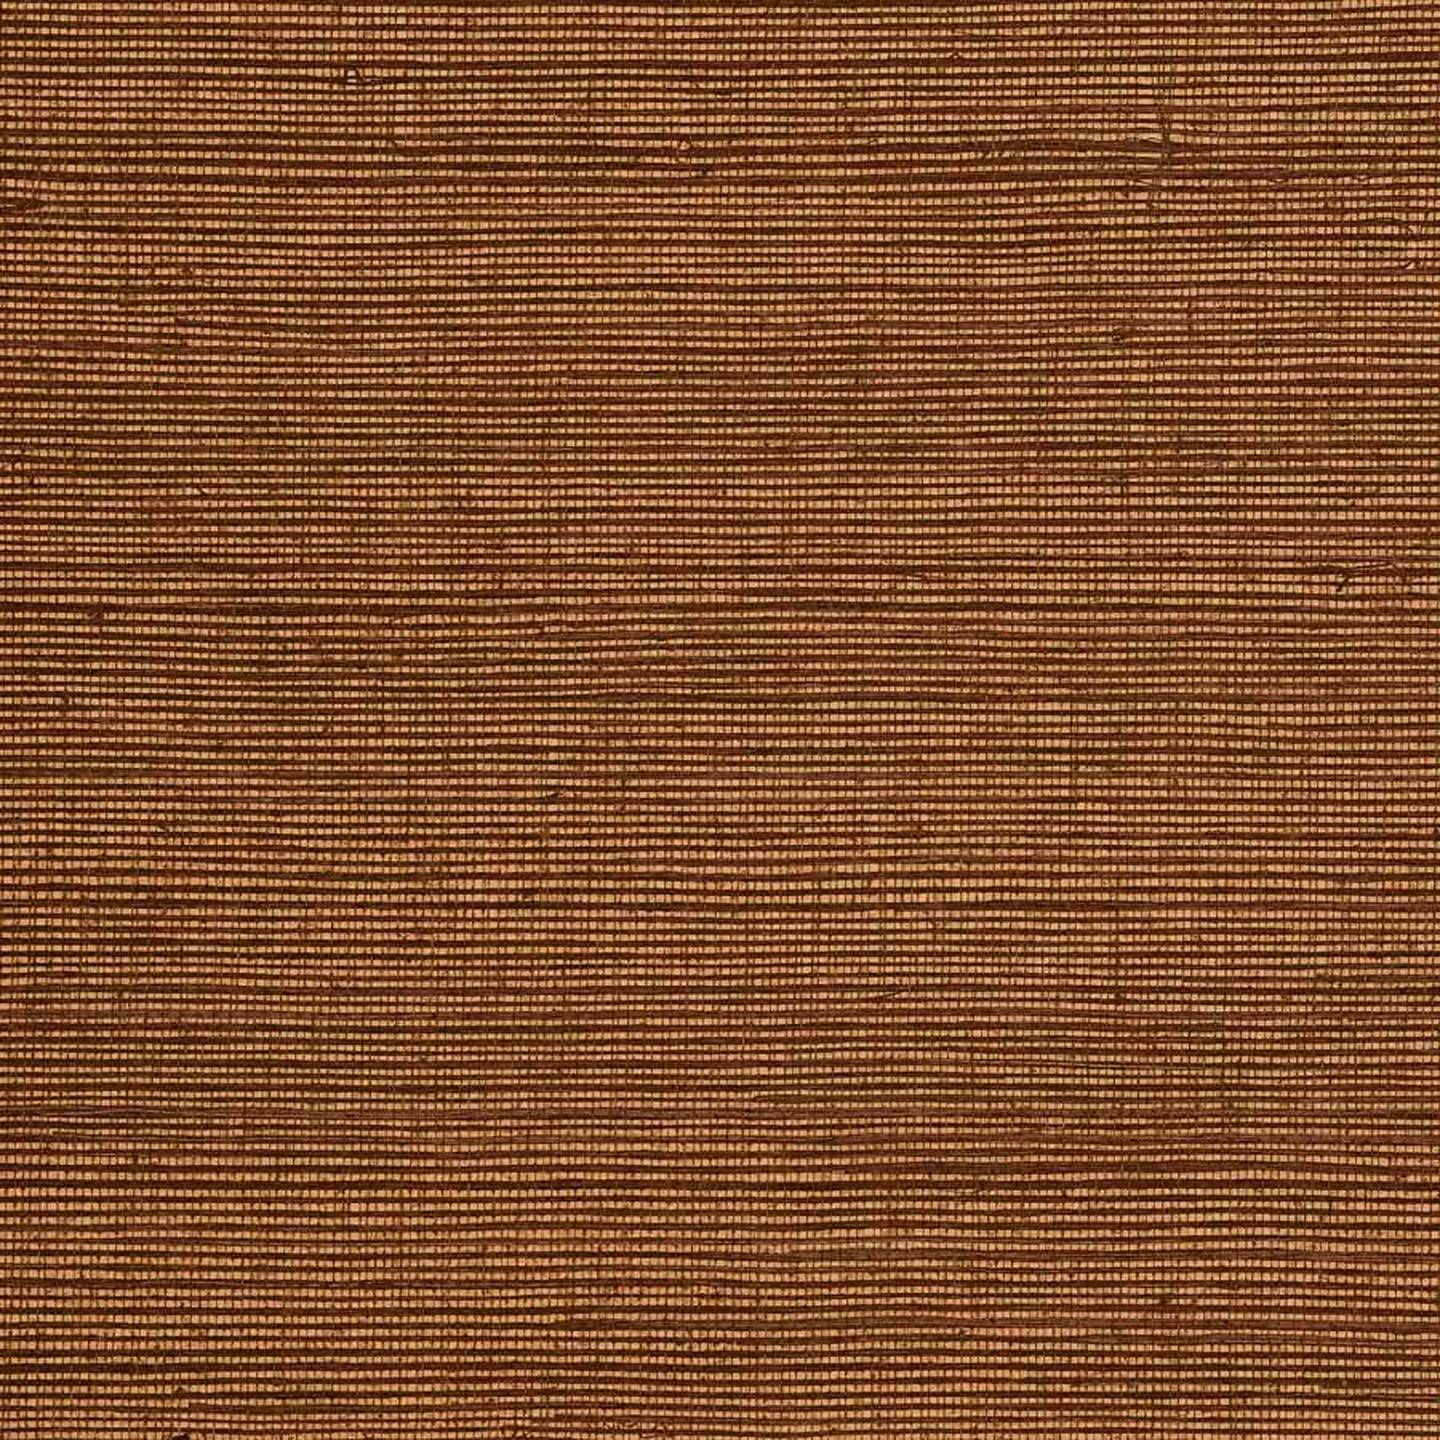 nomaad.eu-natural wallcovering,handcrafted,grasscloth